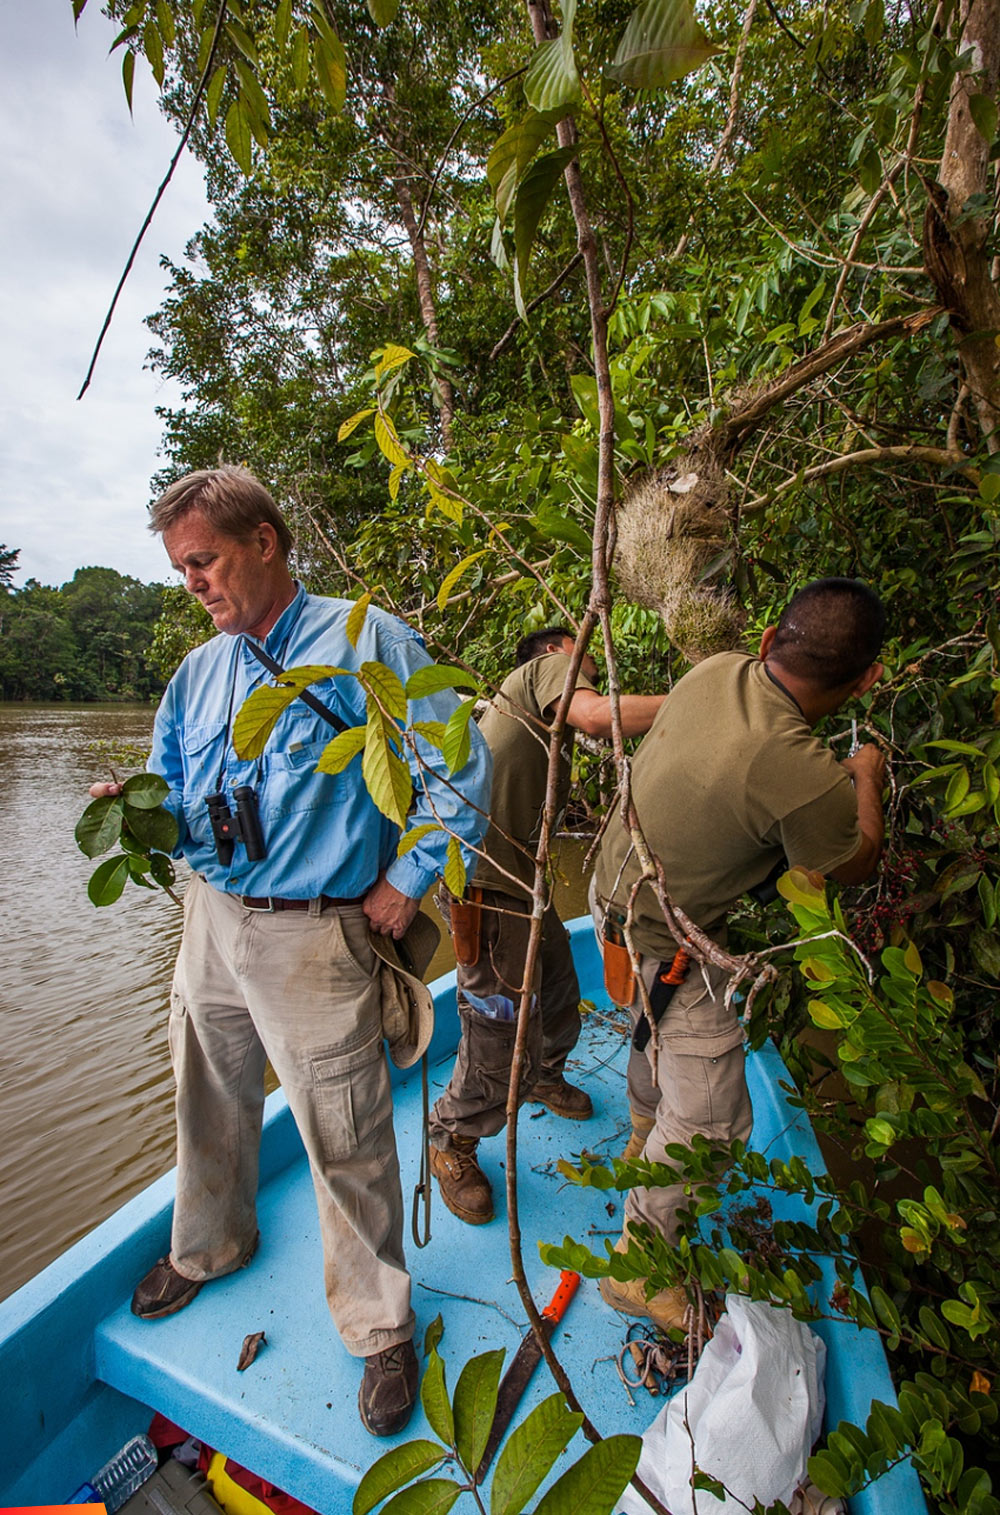 Studying and collecting epiphytes, Bruce studies the host tree leaves while Marvin and David prepare to collect.